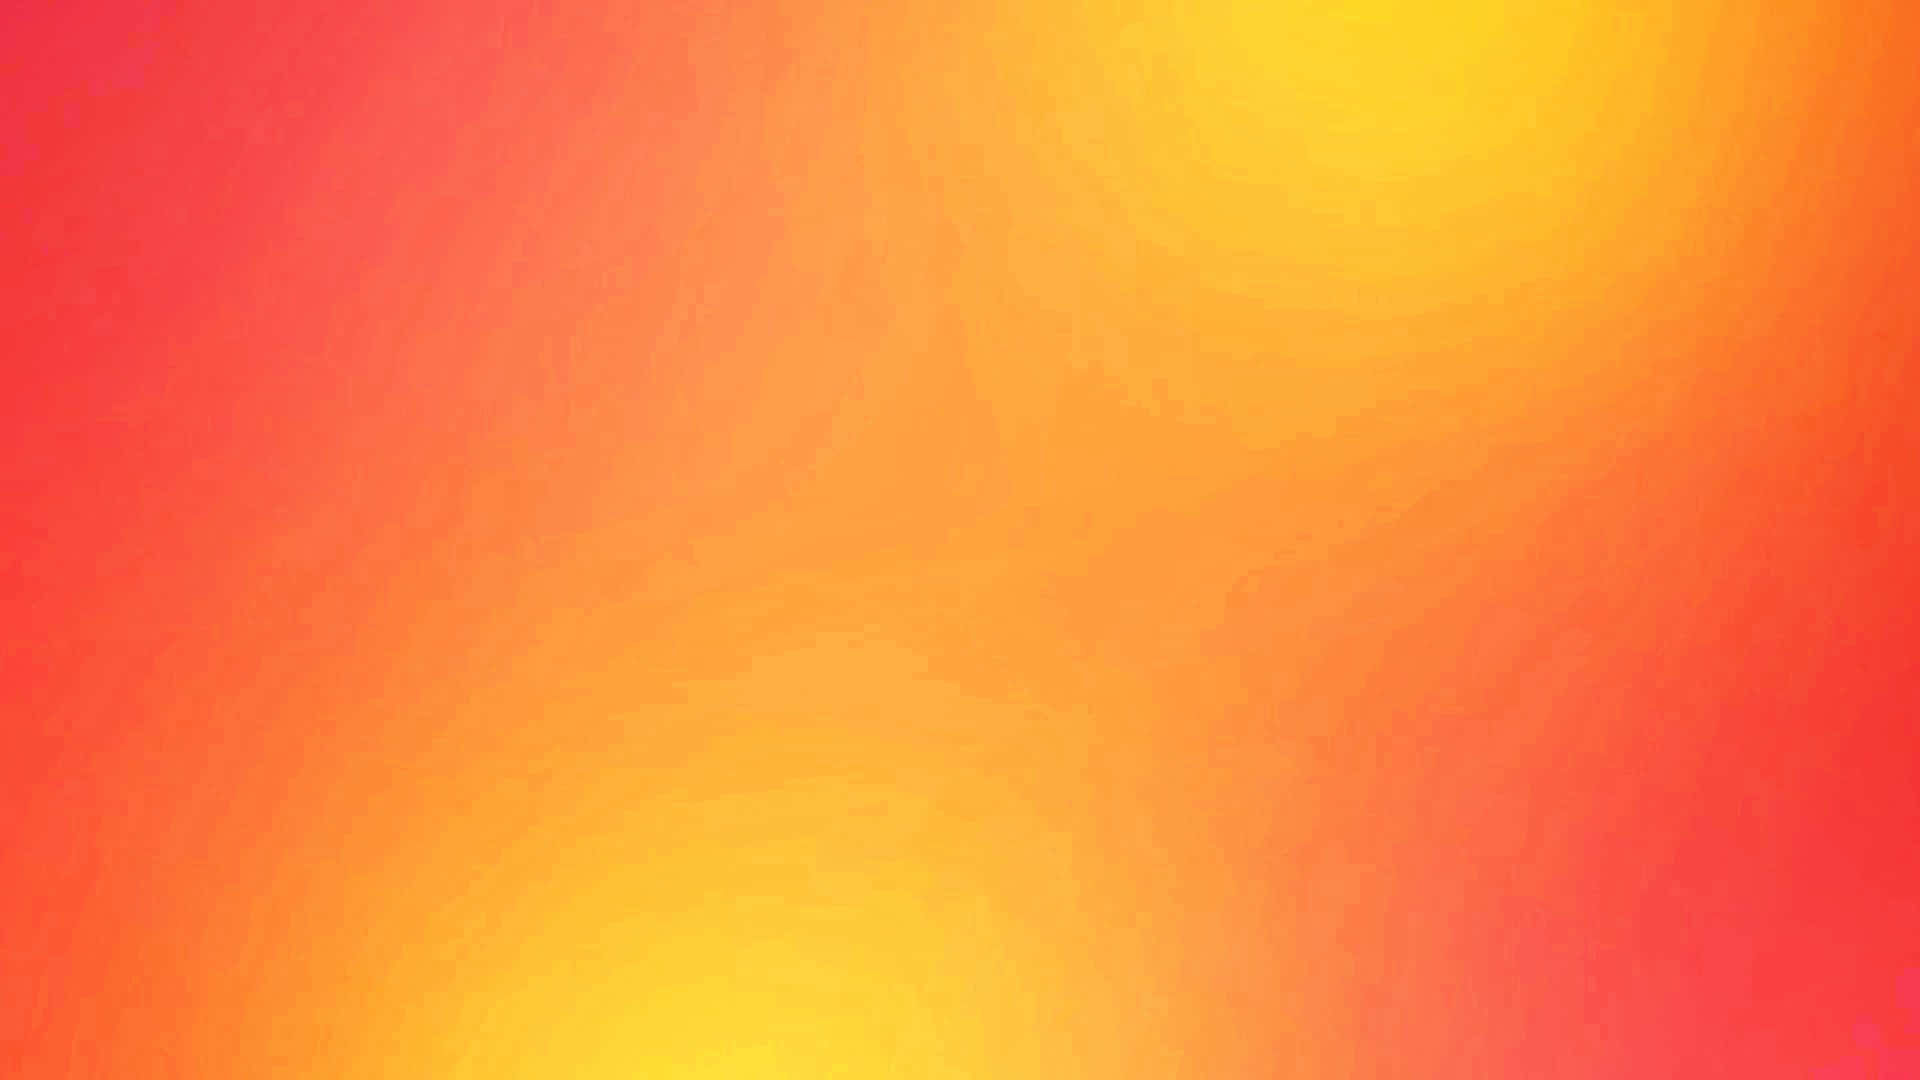 Download A Bright Orange And Yellow Background | Wallpapers.com